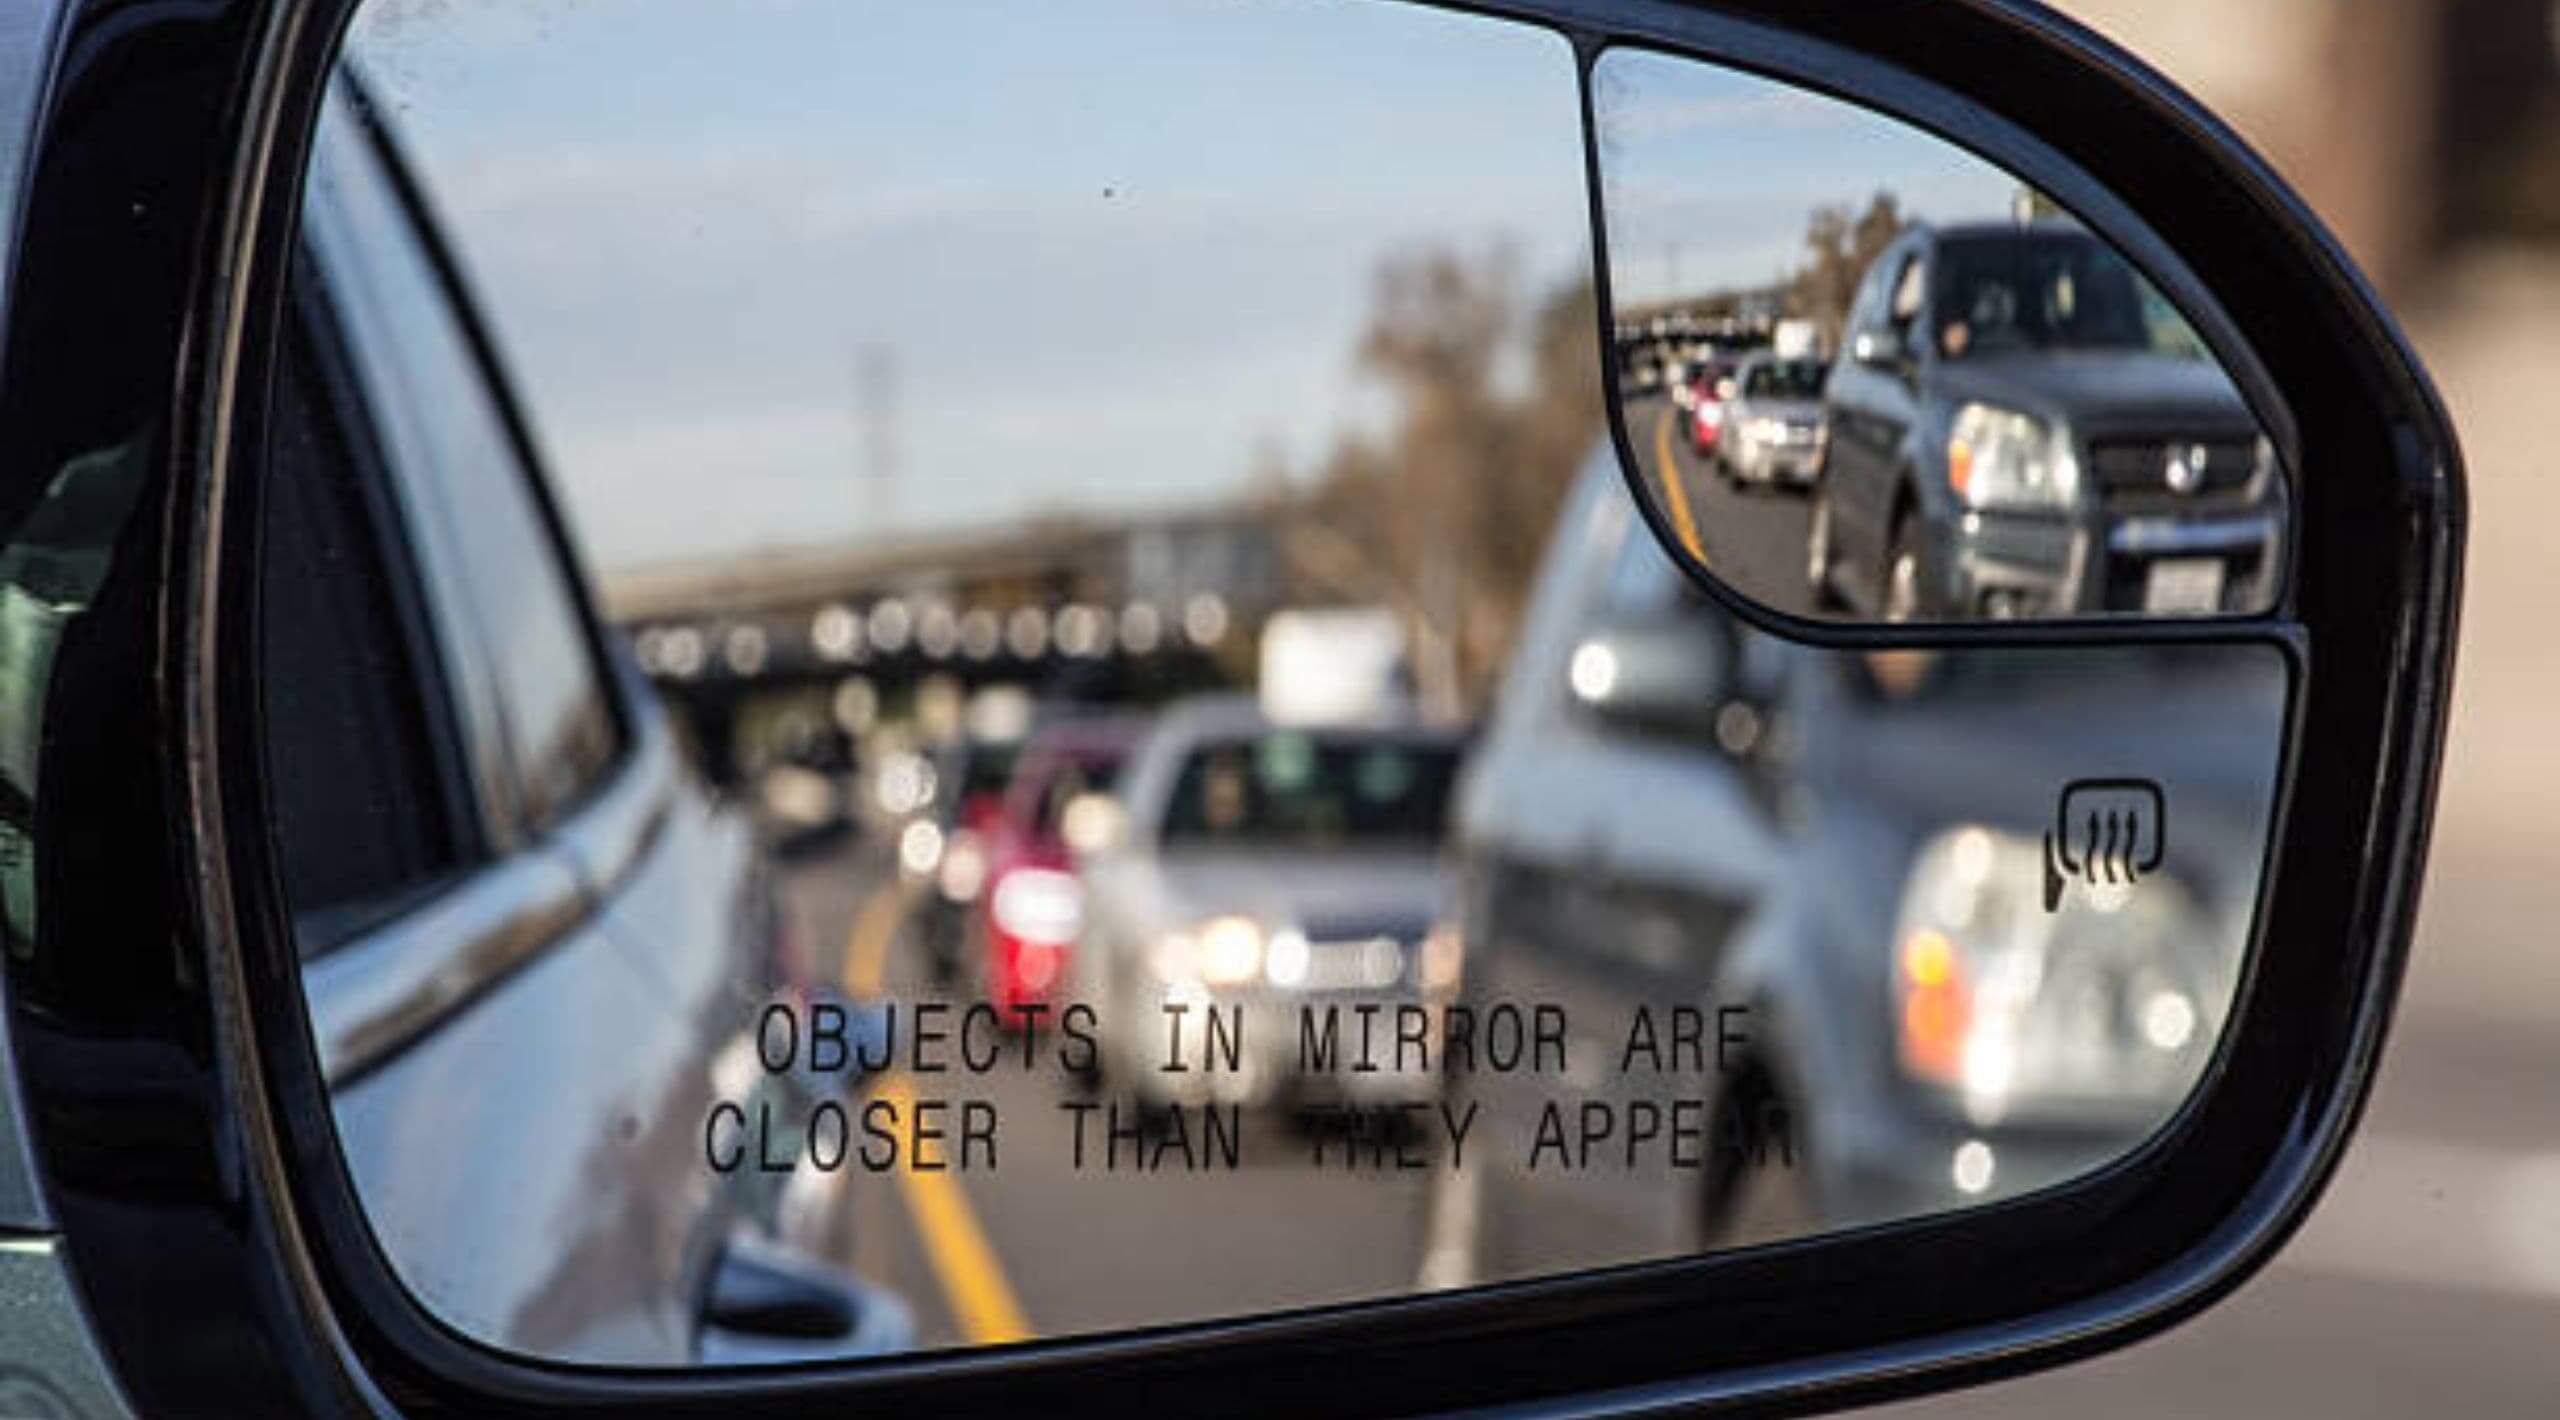 Why Objects In Mirror Are Closer Than They Appear